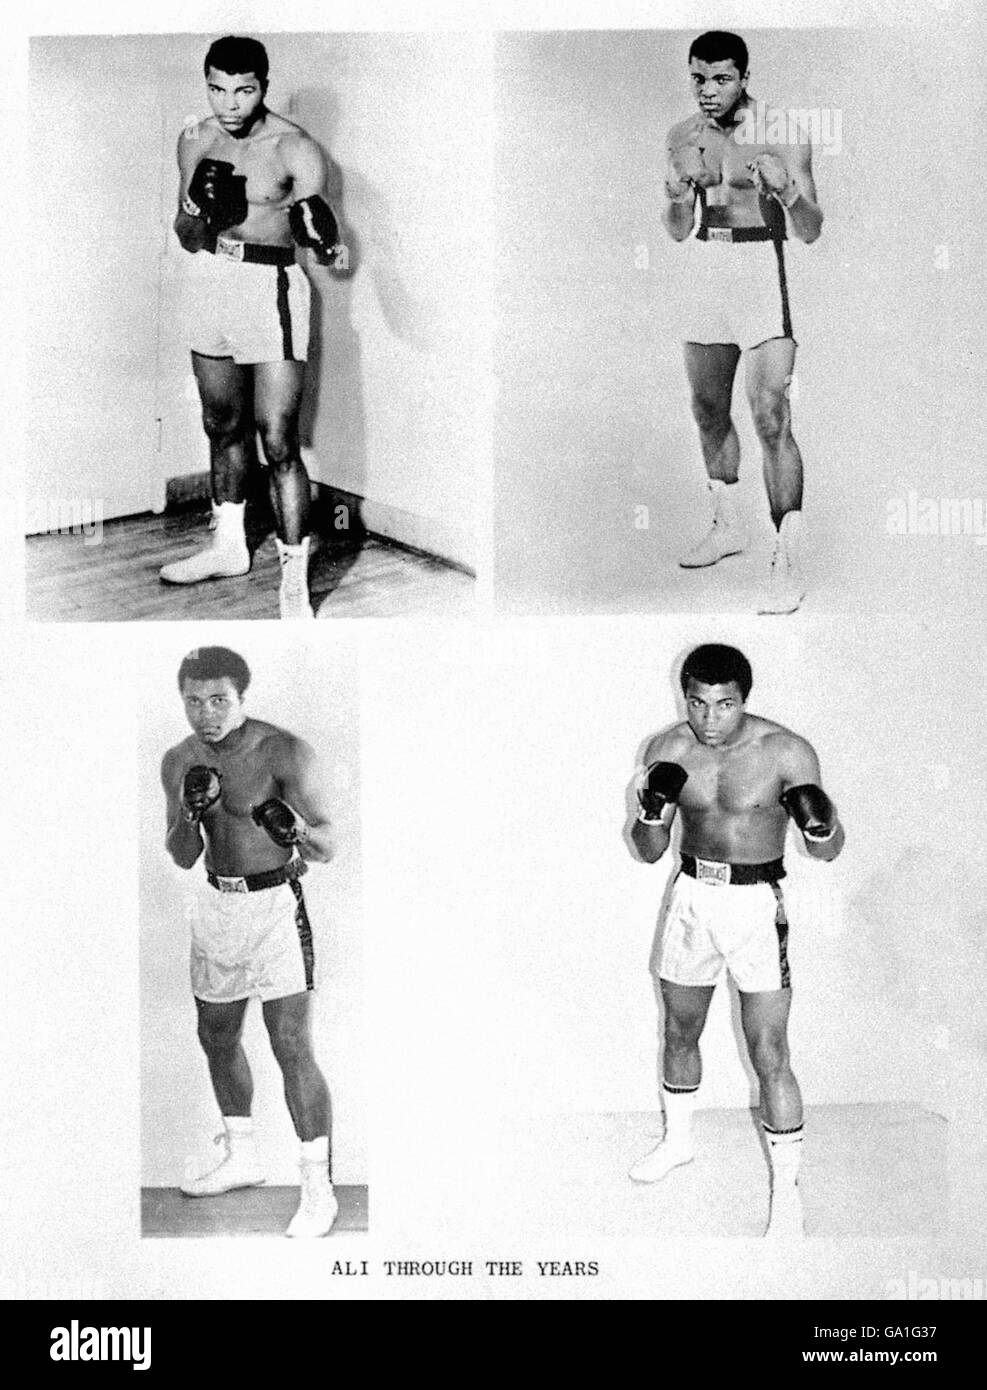 Boxing - Muhammad Ali. A montage of Muhammad Ali through the years from 1961 to 1975 Stock Photo